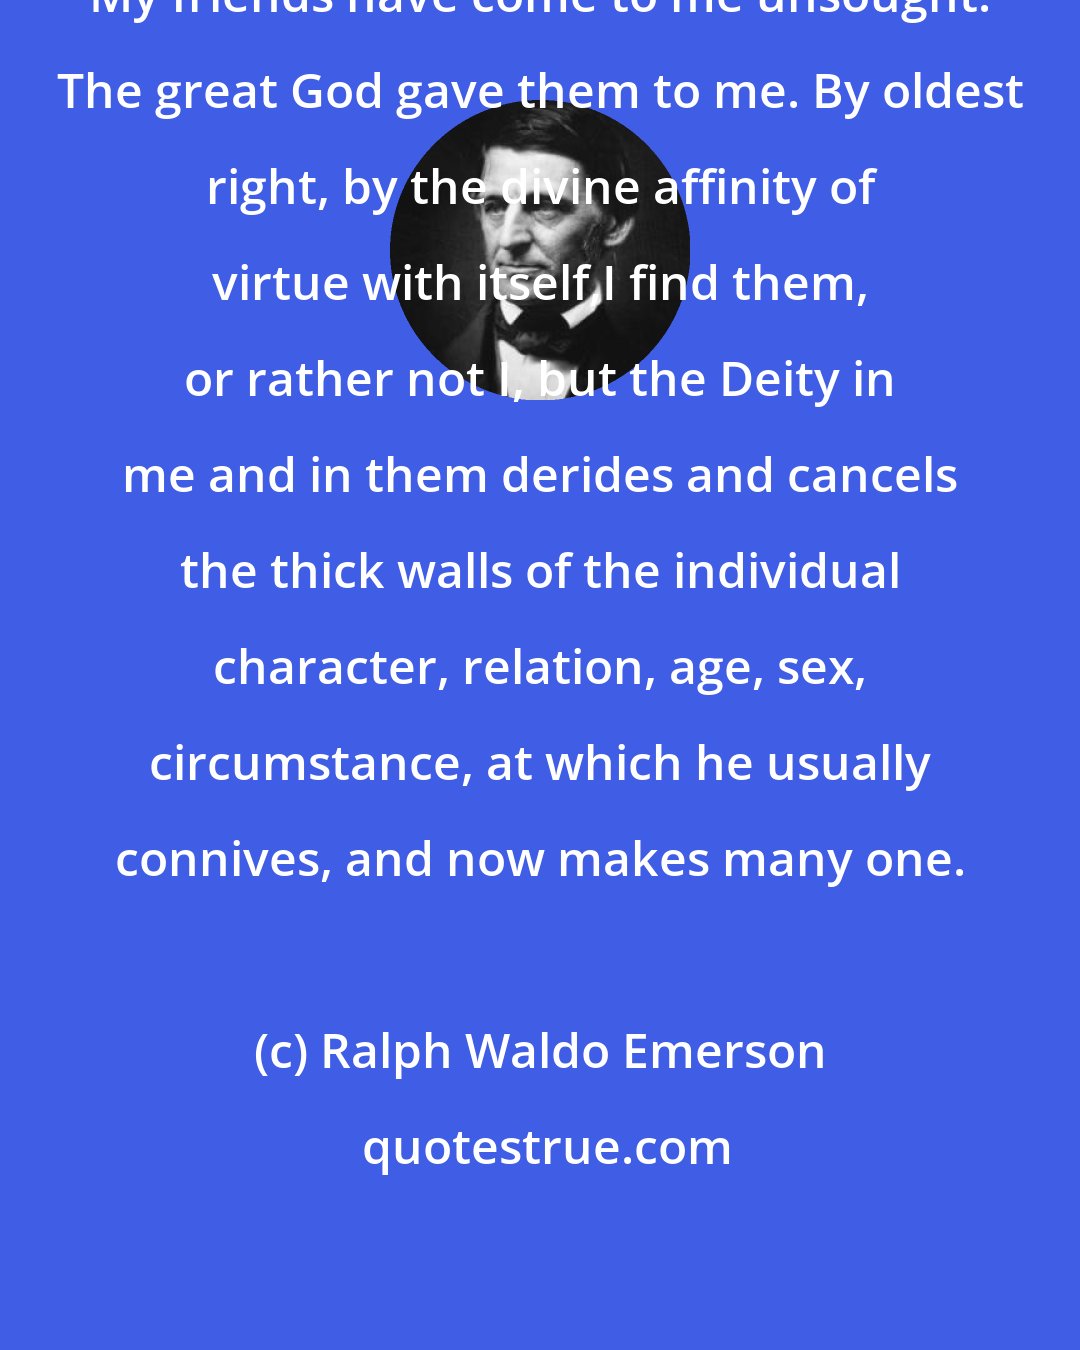 Ralph Waldo Emerson: My friends have come to me unsought. The great God gave them to me. By oldest right, by the divine affinity of virtue with itself,I find them, or rather not I, but the Deity in me and in them derides and cancels the thick walls of the individual character, relation, age, sex, circumstance, at which he usually connives, and now makes many one.